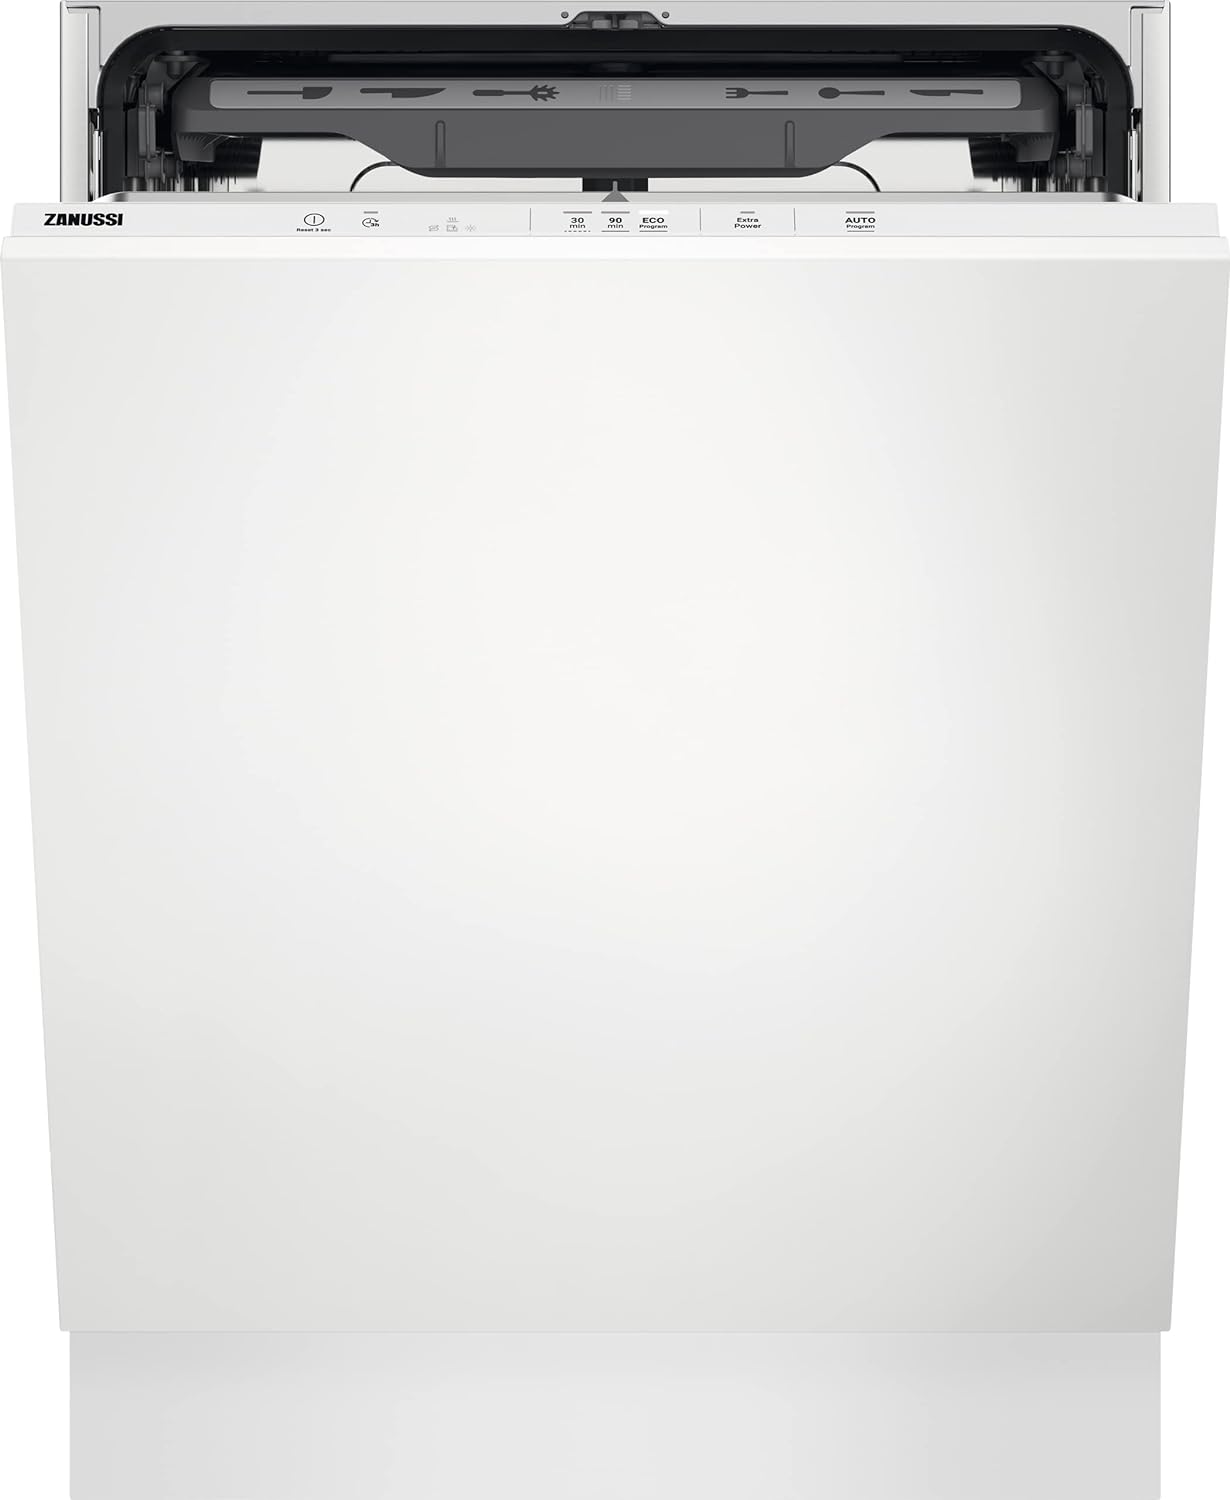 Zanussi Built - In Intergrated Dishwasher ZDLN2621 / 14 place settings/Full size White - Amazing Gadgets Outlet